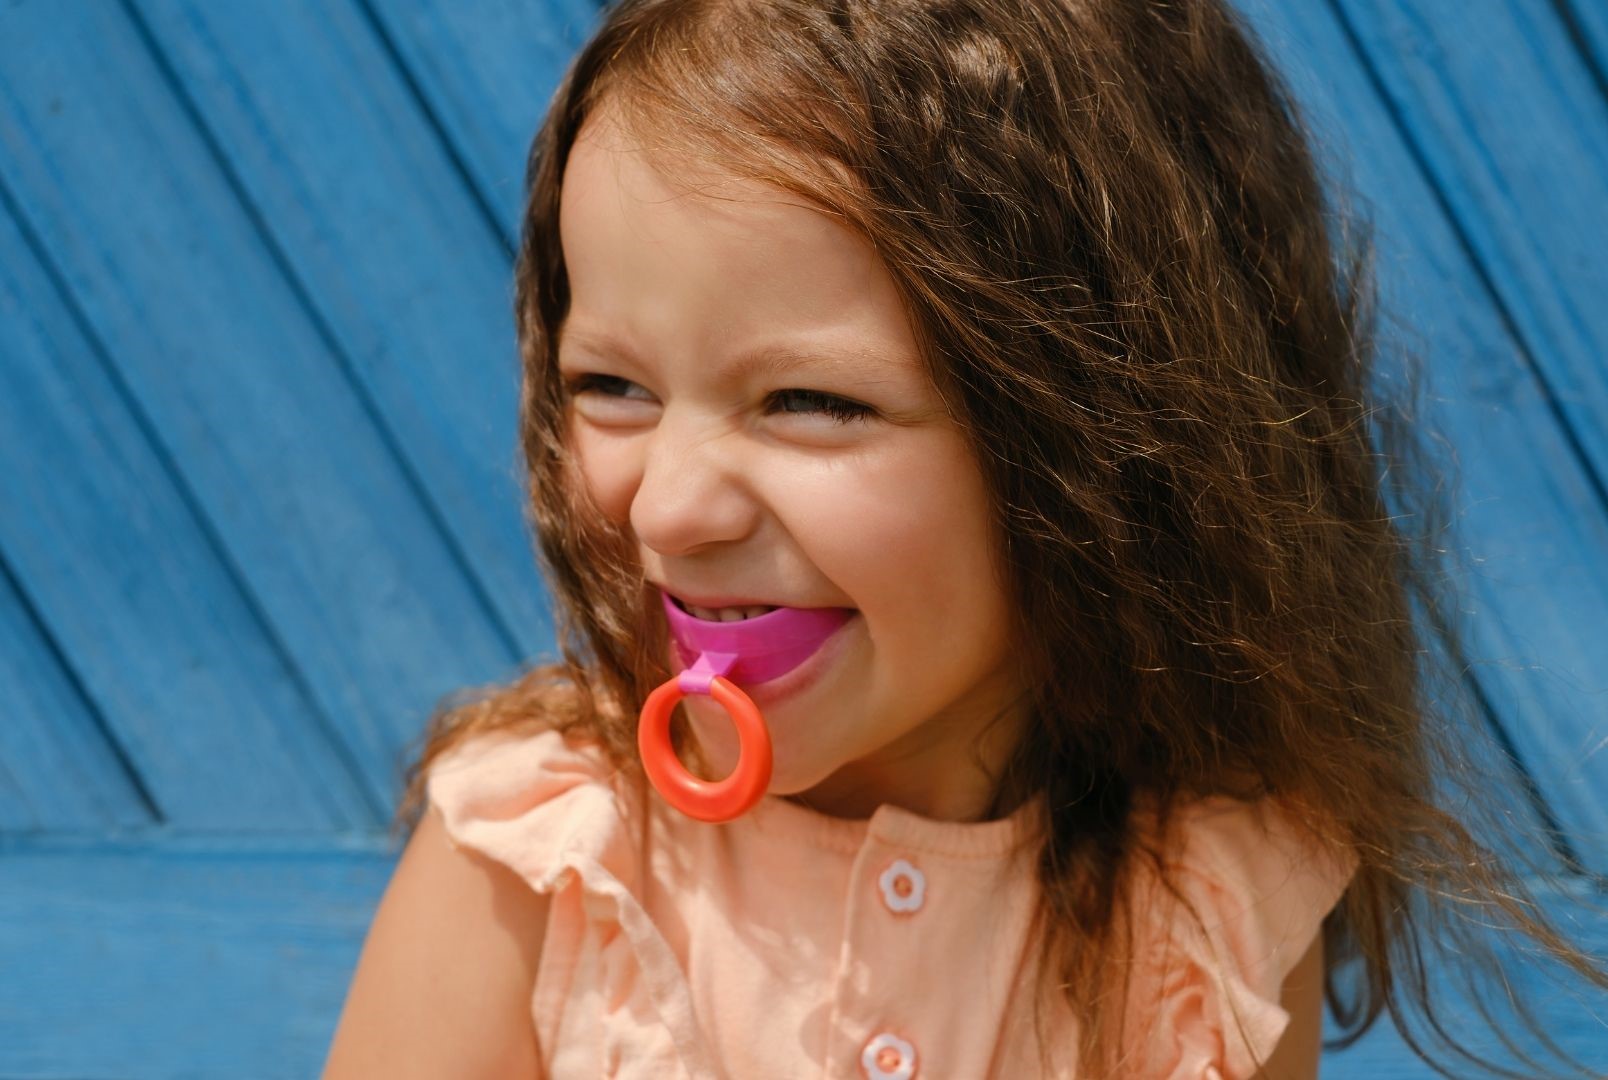 Little girl with Mouthguard